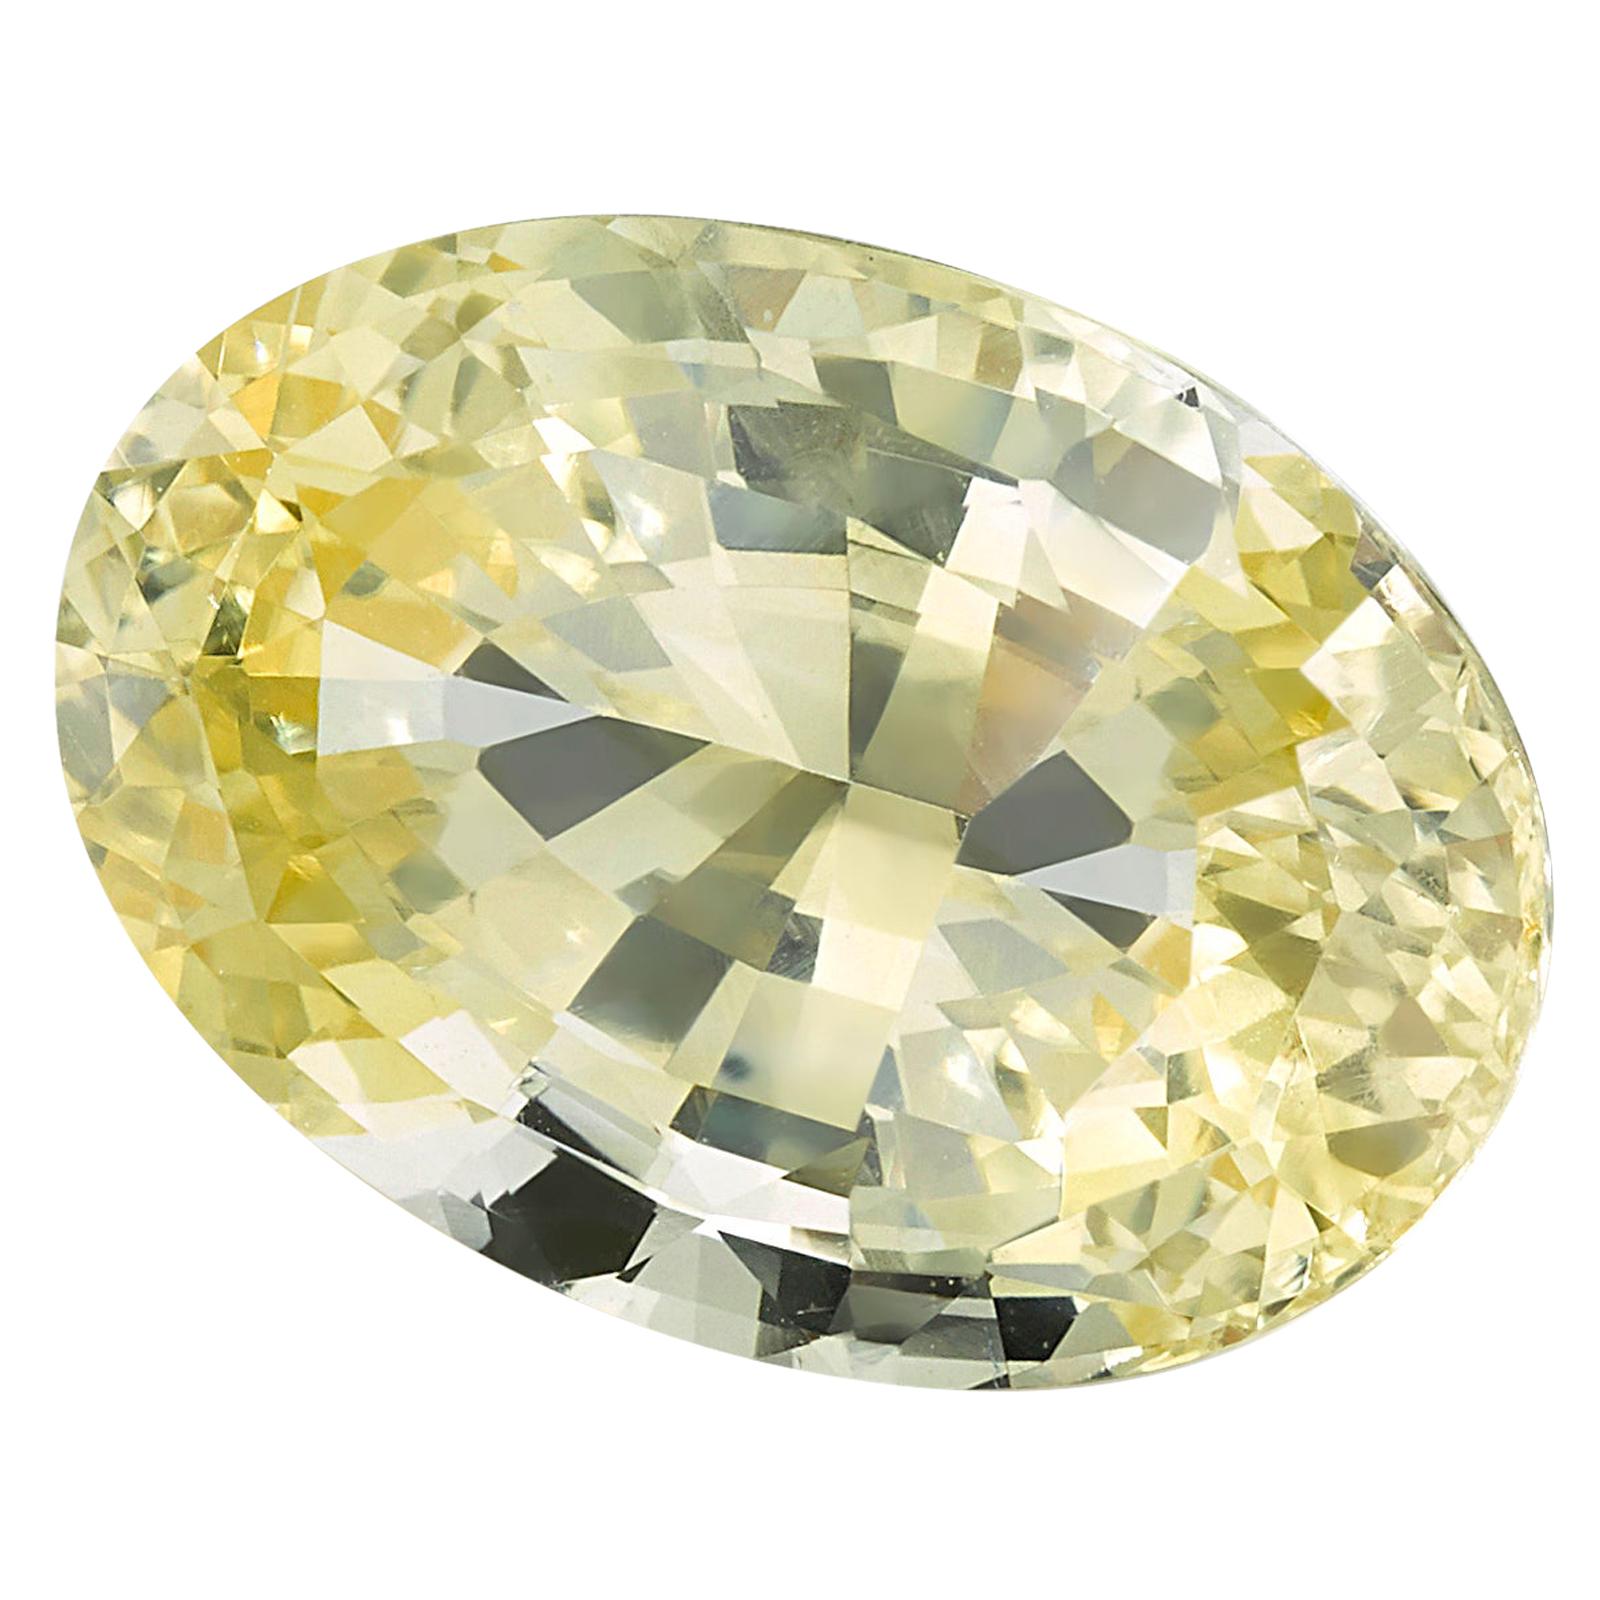 Unheated GIA Certified 3.98 Carat Oval Yellow Sapphire Loose Stone